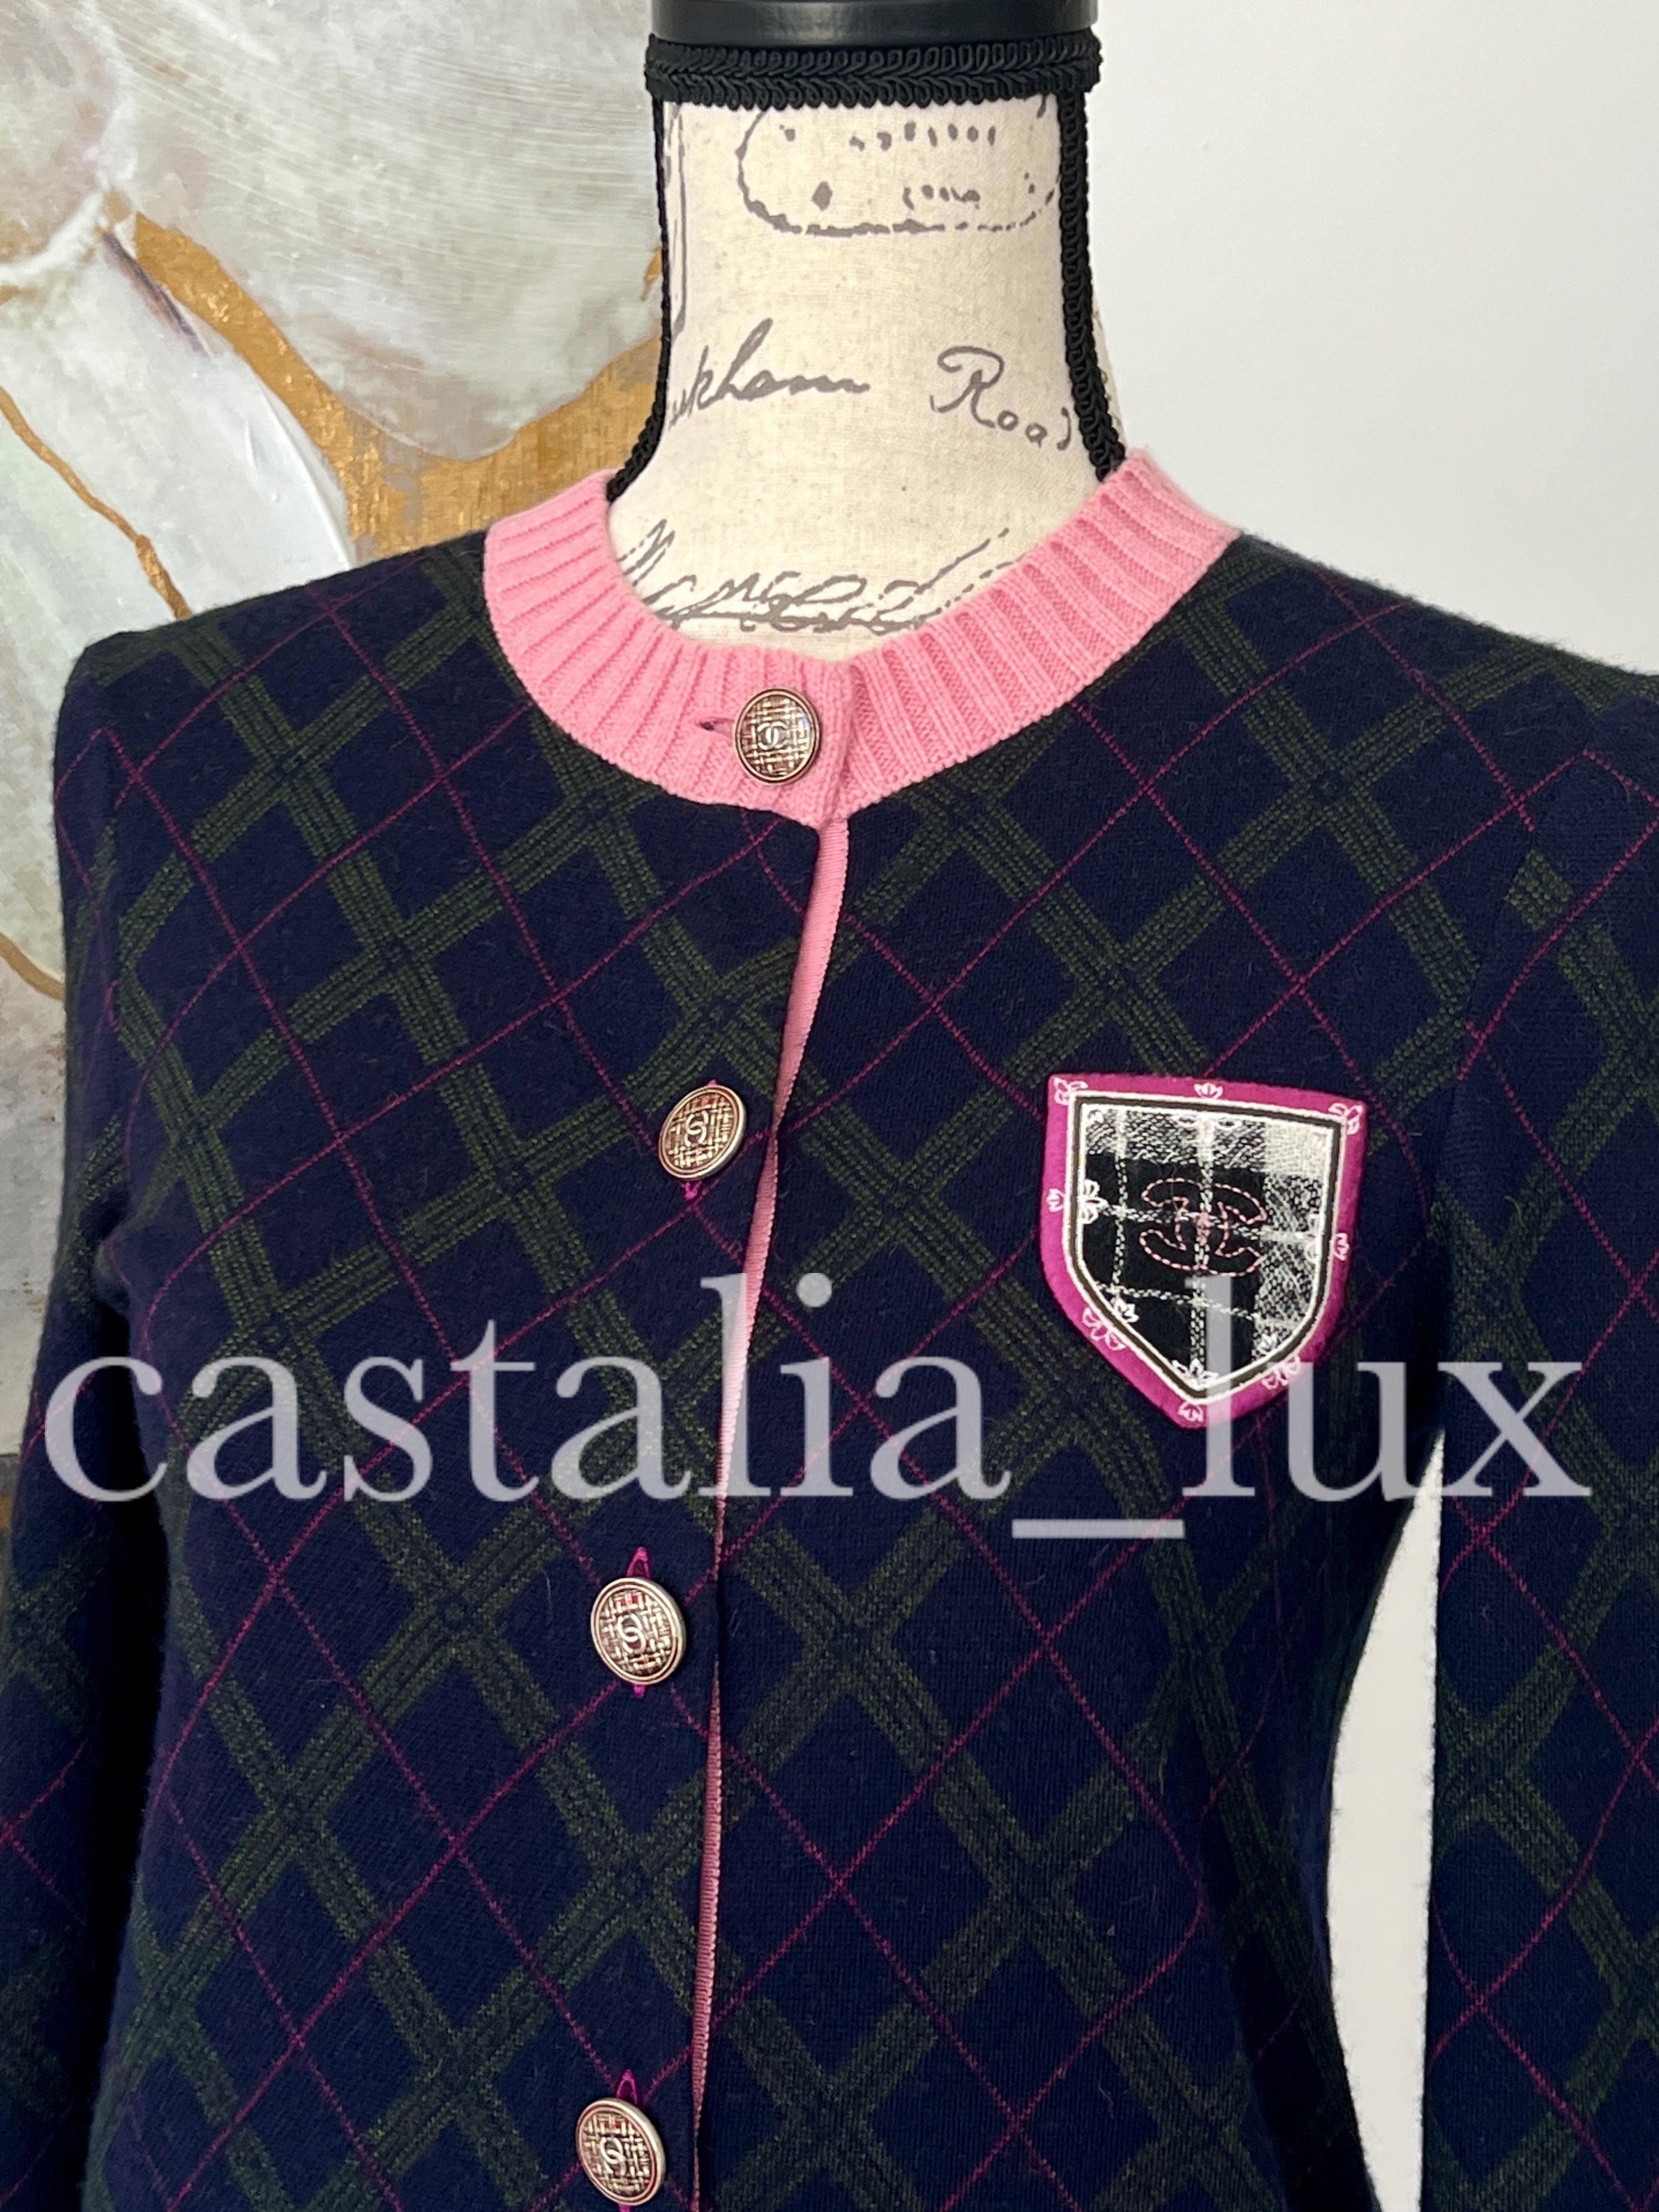 DHL Express delivery 2 days worldwide.
Extremely rare, collectors Chanel CC Logo Patch cashmere jacket with tartan pattern from fairy Paris / EDINBURGH Collection.
- CC plaid buttons
- composition 100% cashmere
- colours and detail like a masterpice